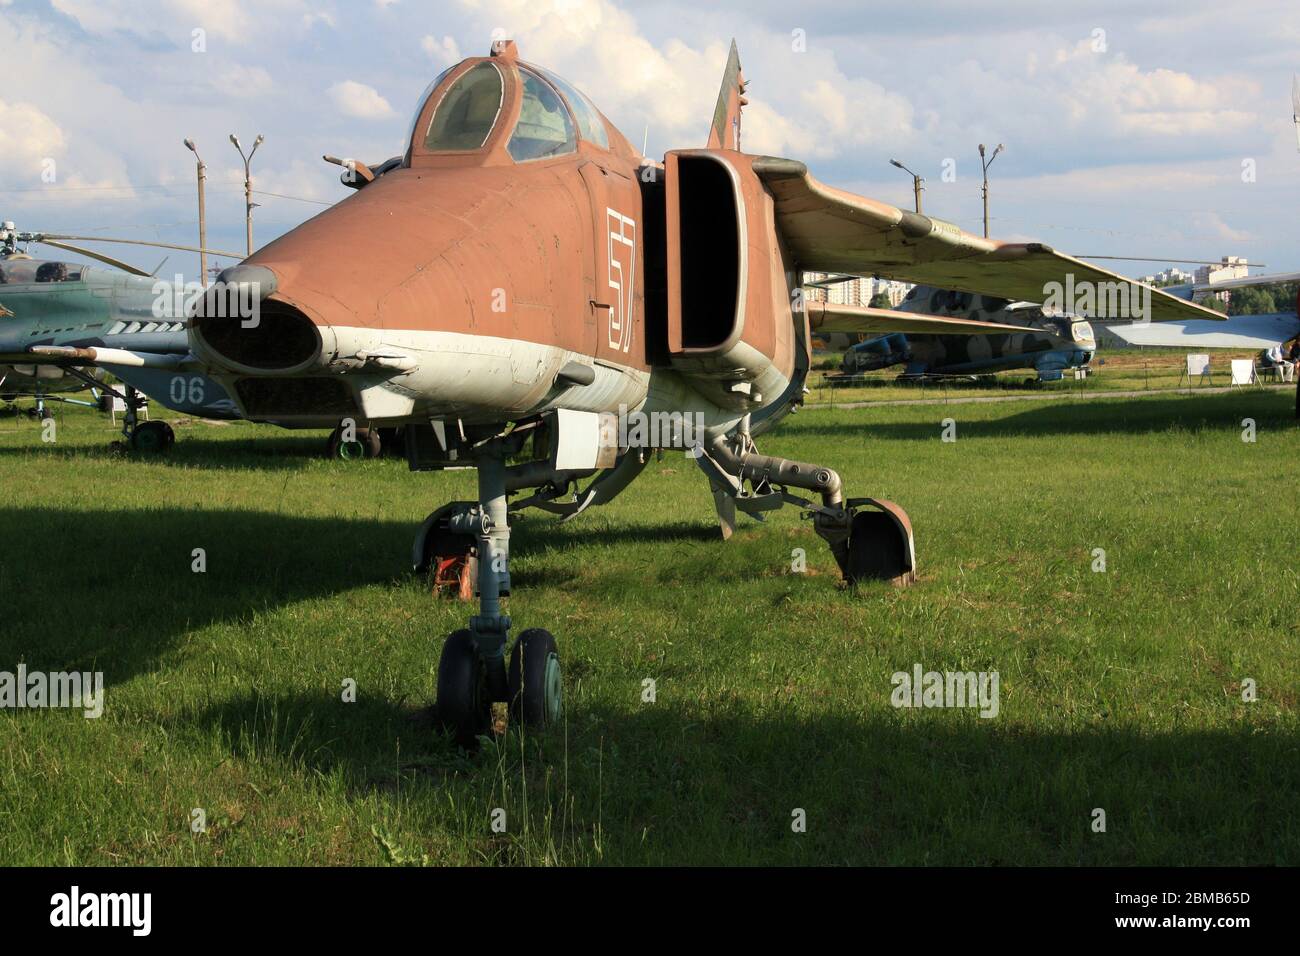 Exterior view of a Mikoyan-Gurevich MiG-27 'Flogger' ground-attack aircraft at the Zhulyany State Aviation Museum of Ukraine Stock Photo